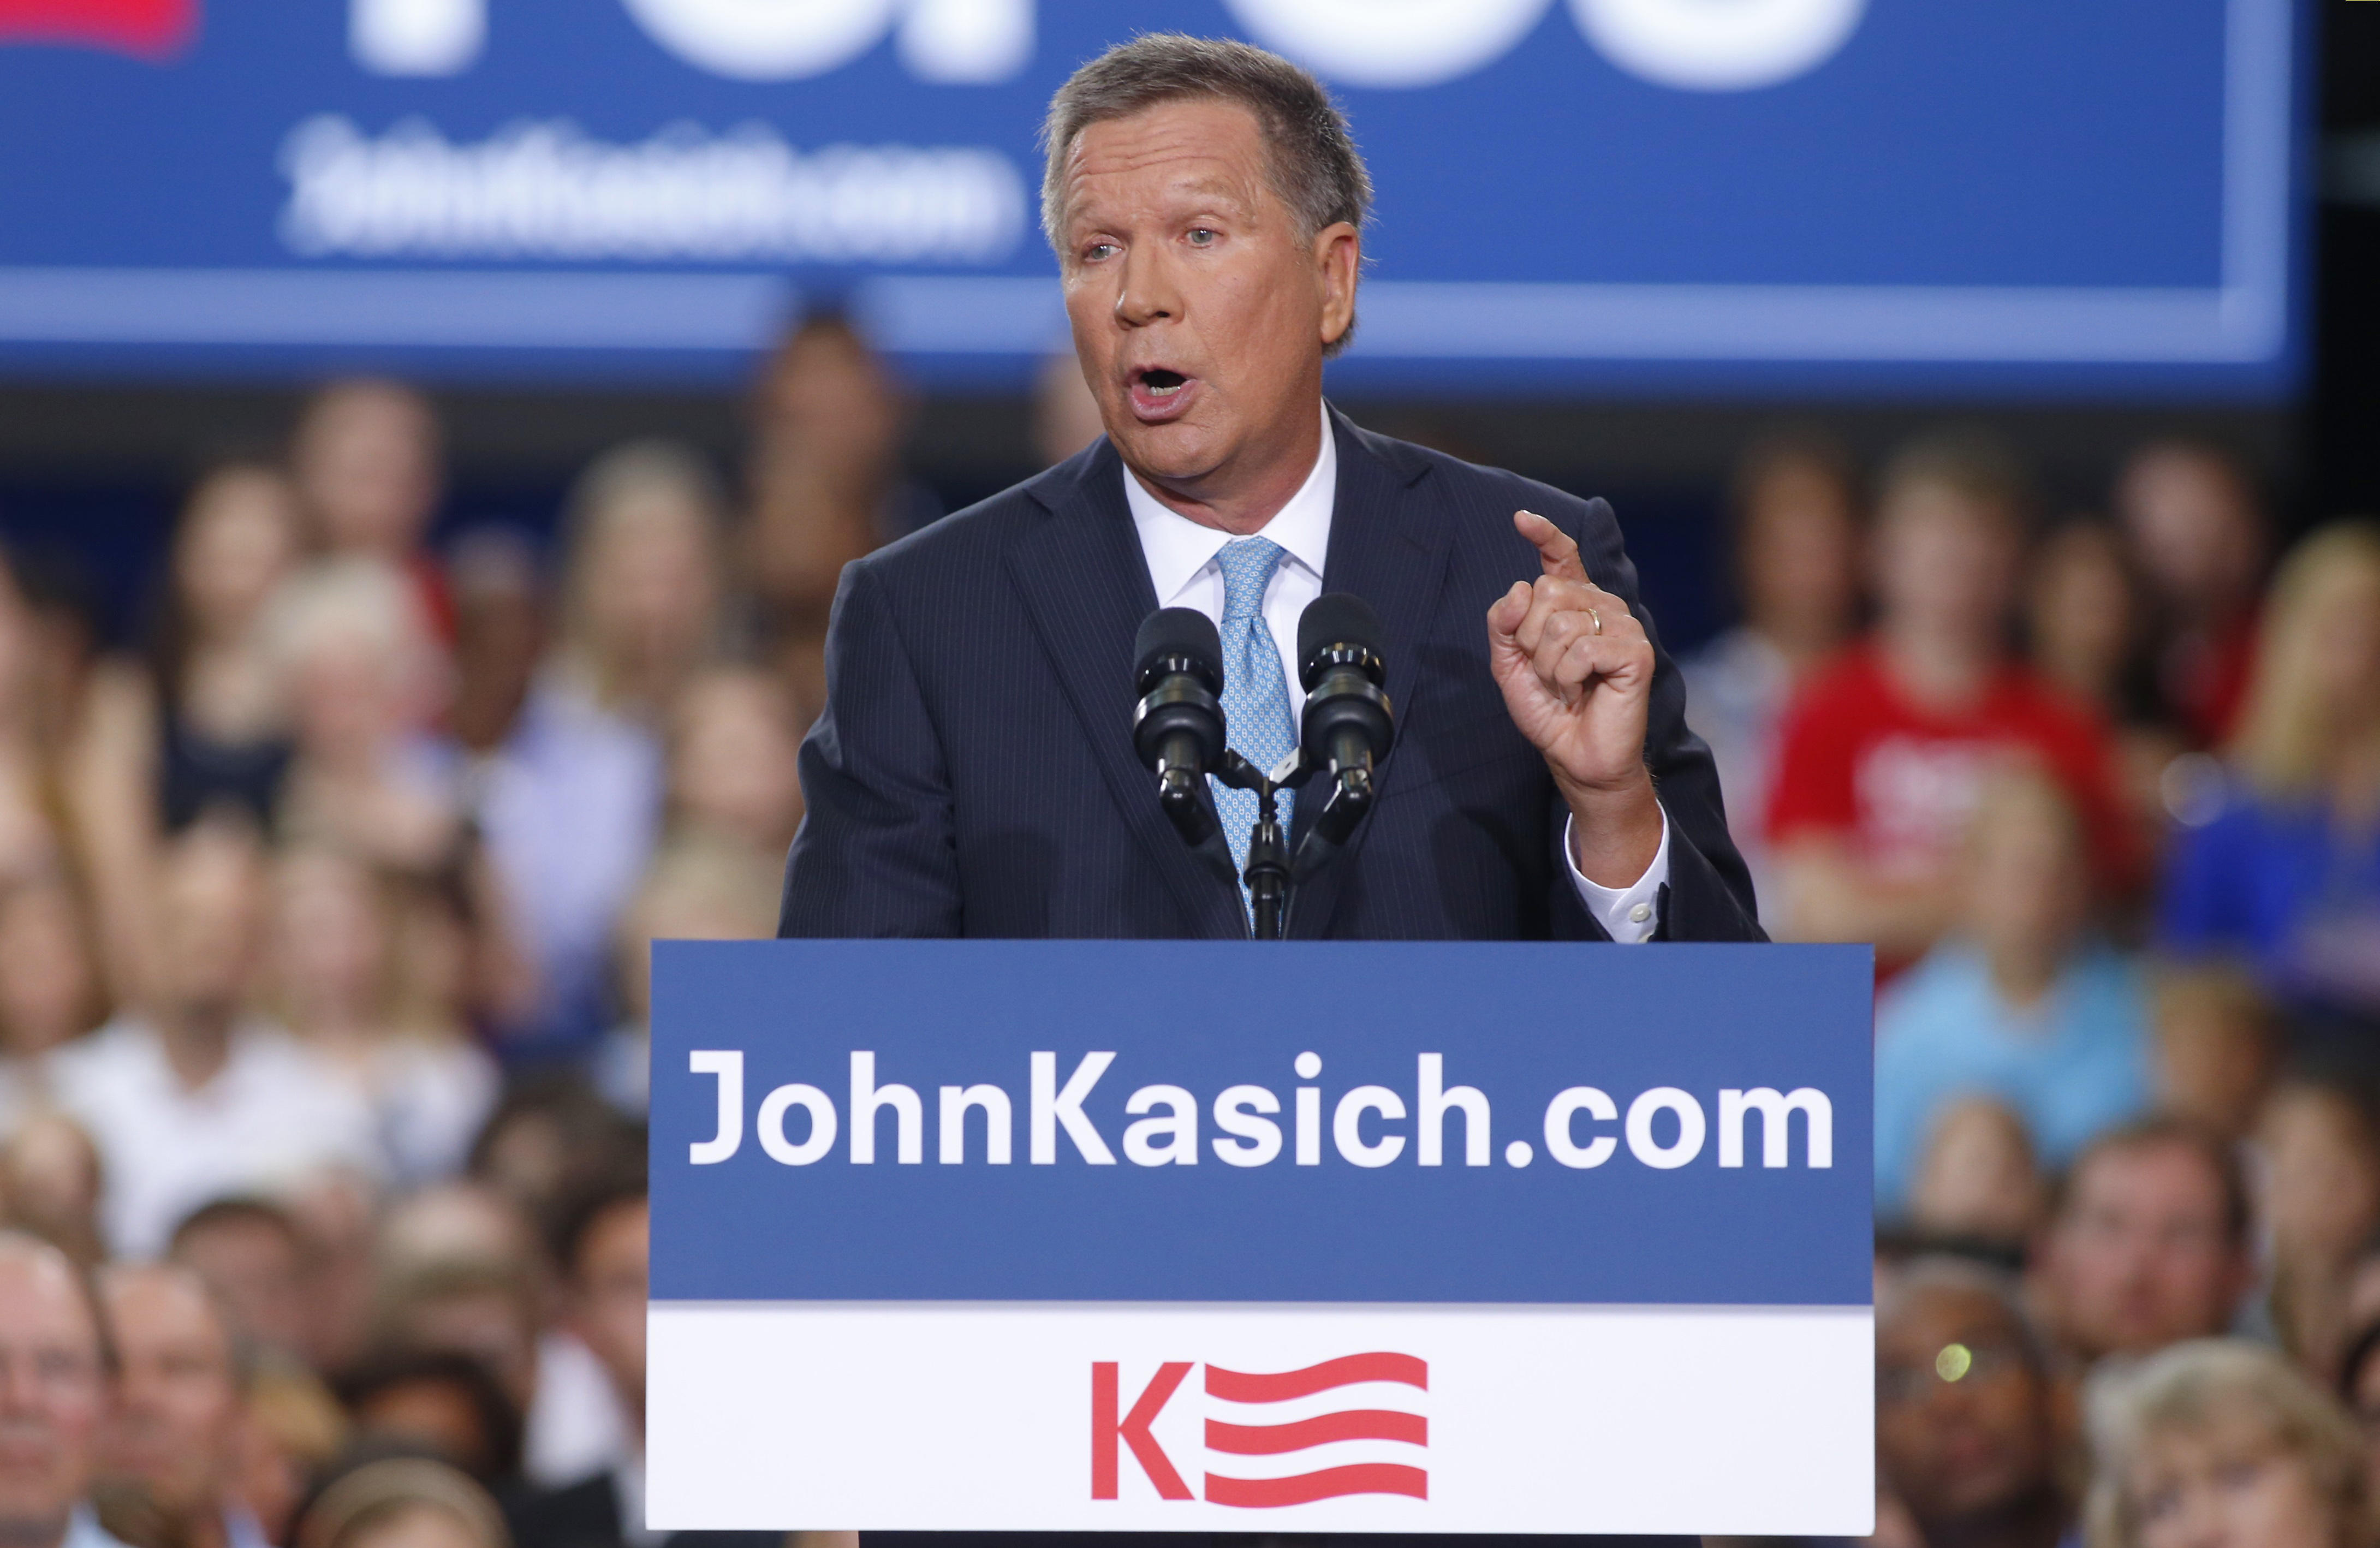 Republican U.S. presidential candidate and Ohio Governor John Kasich formally announces his campaign for the 2016 Republican presidential nomination during a kickoff rally in Columbus